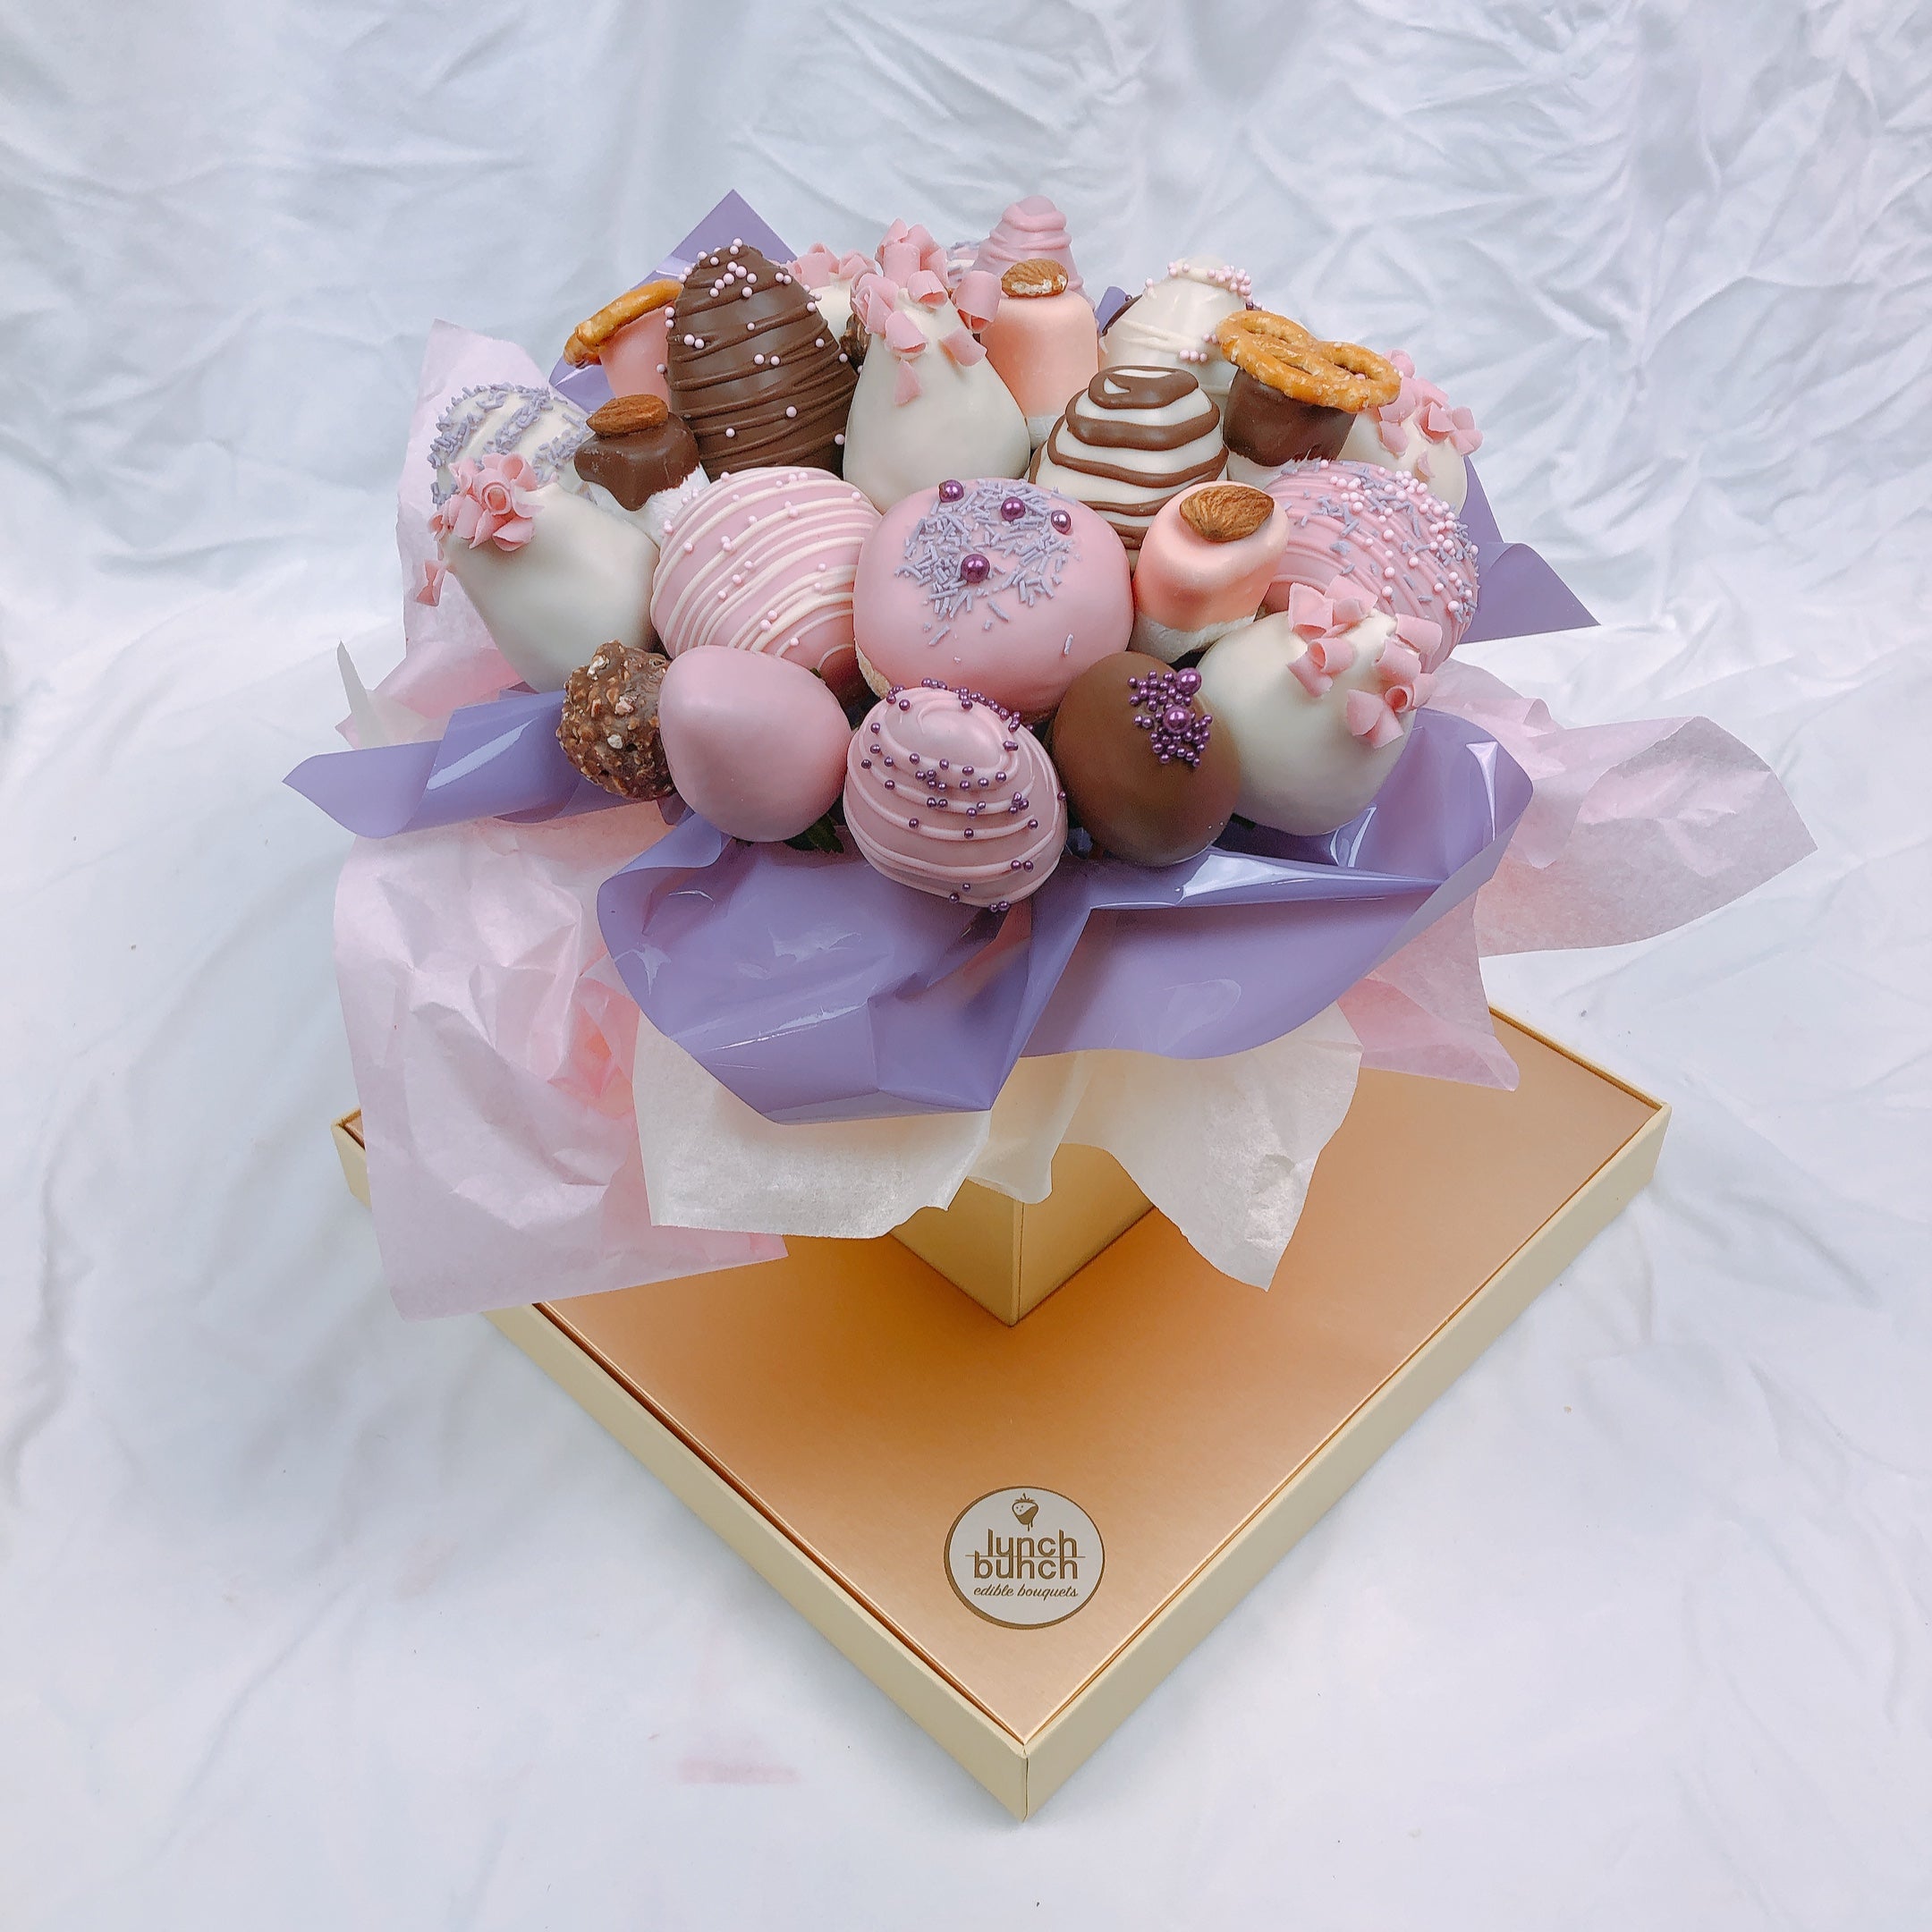 Chocolate Strawberry & Donut Bouquet gift delivery near me birthday sweet treat chocolate bouquet for him